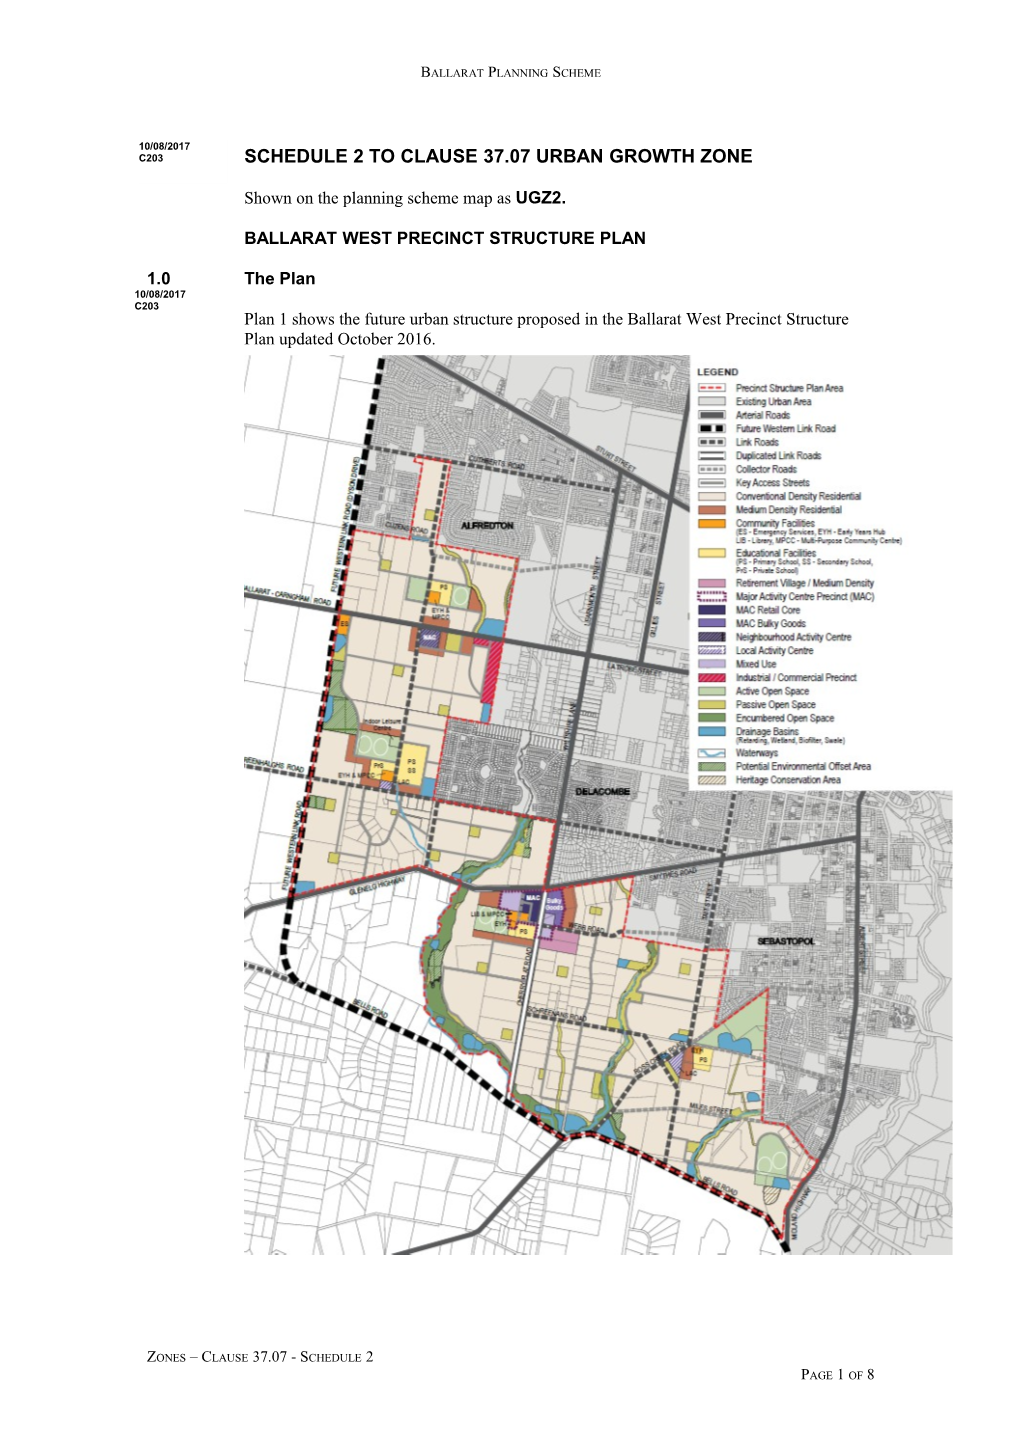 Shown on the Planning Scheme Map As UGZ2